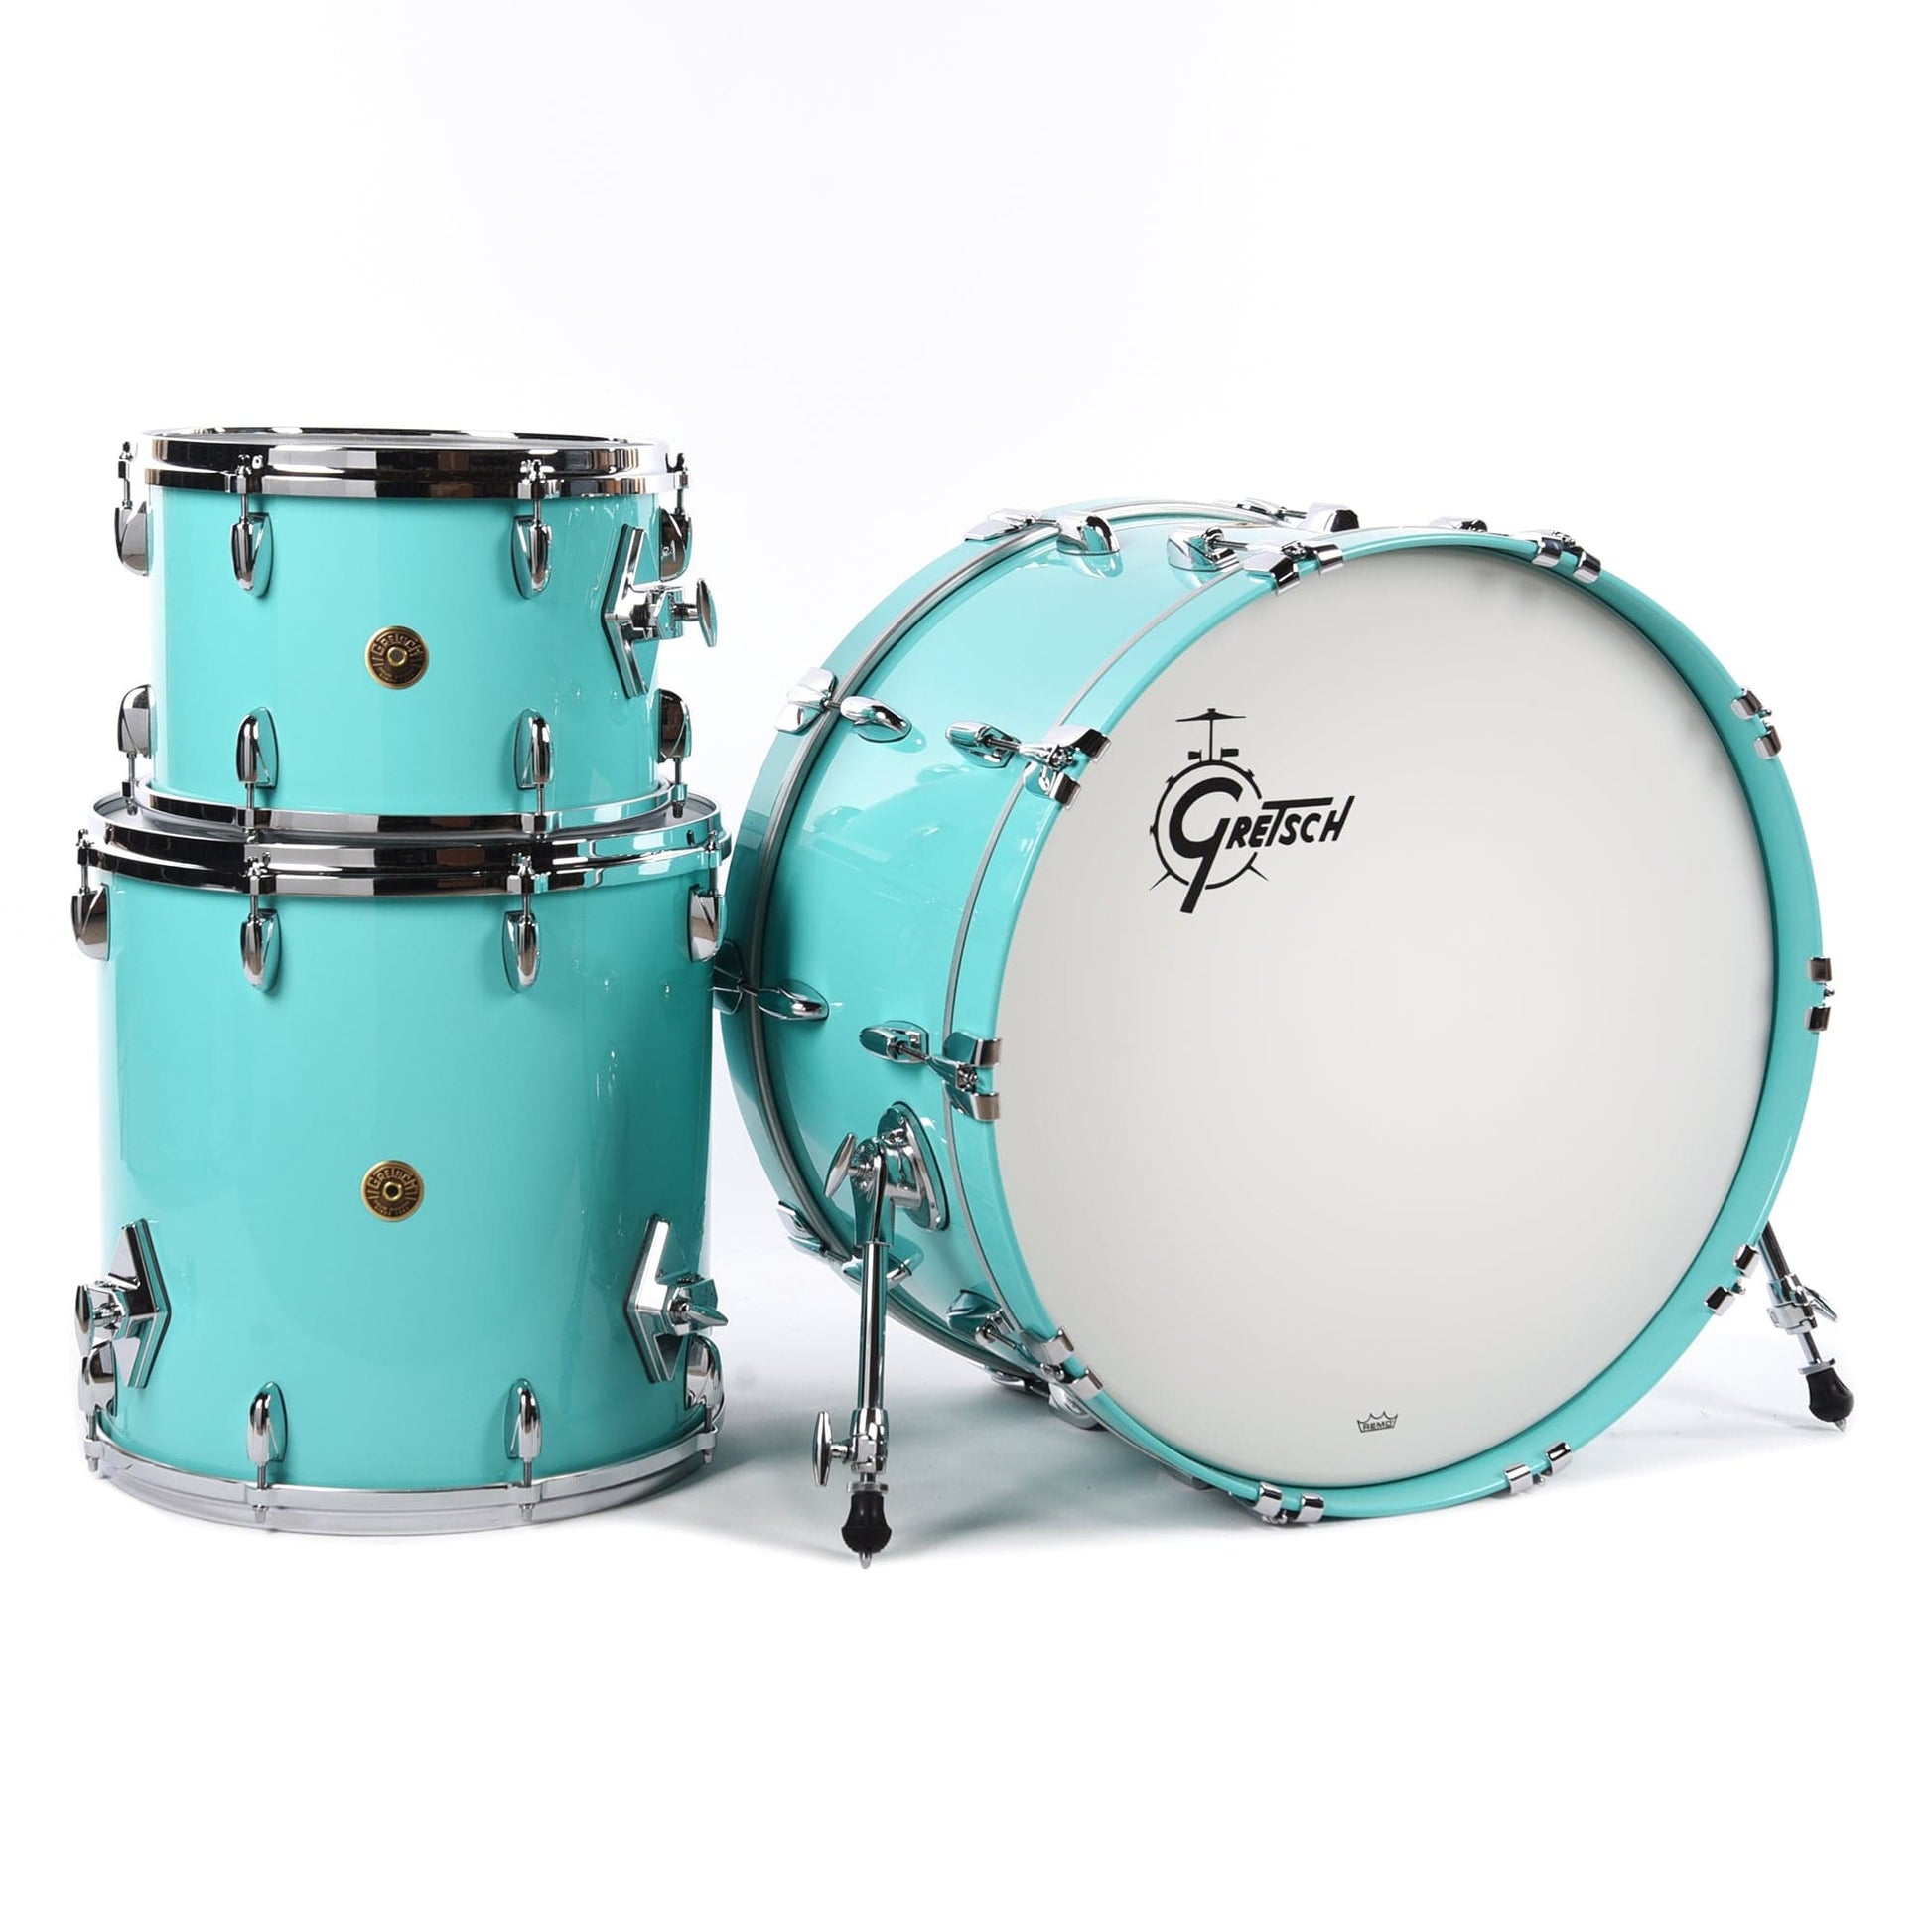 Gretsch USA Custom 13/16/24x12 3pc. Drum Kit Seafoam Green Gloss Drums and Percussion / Acoustic Drums / Full Acoustic Kits